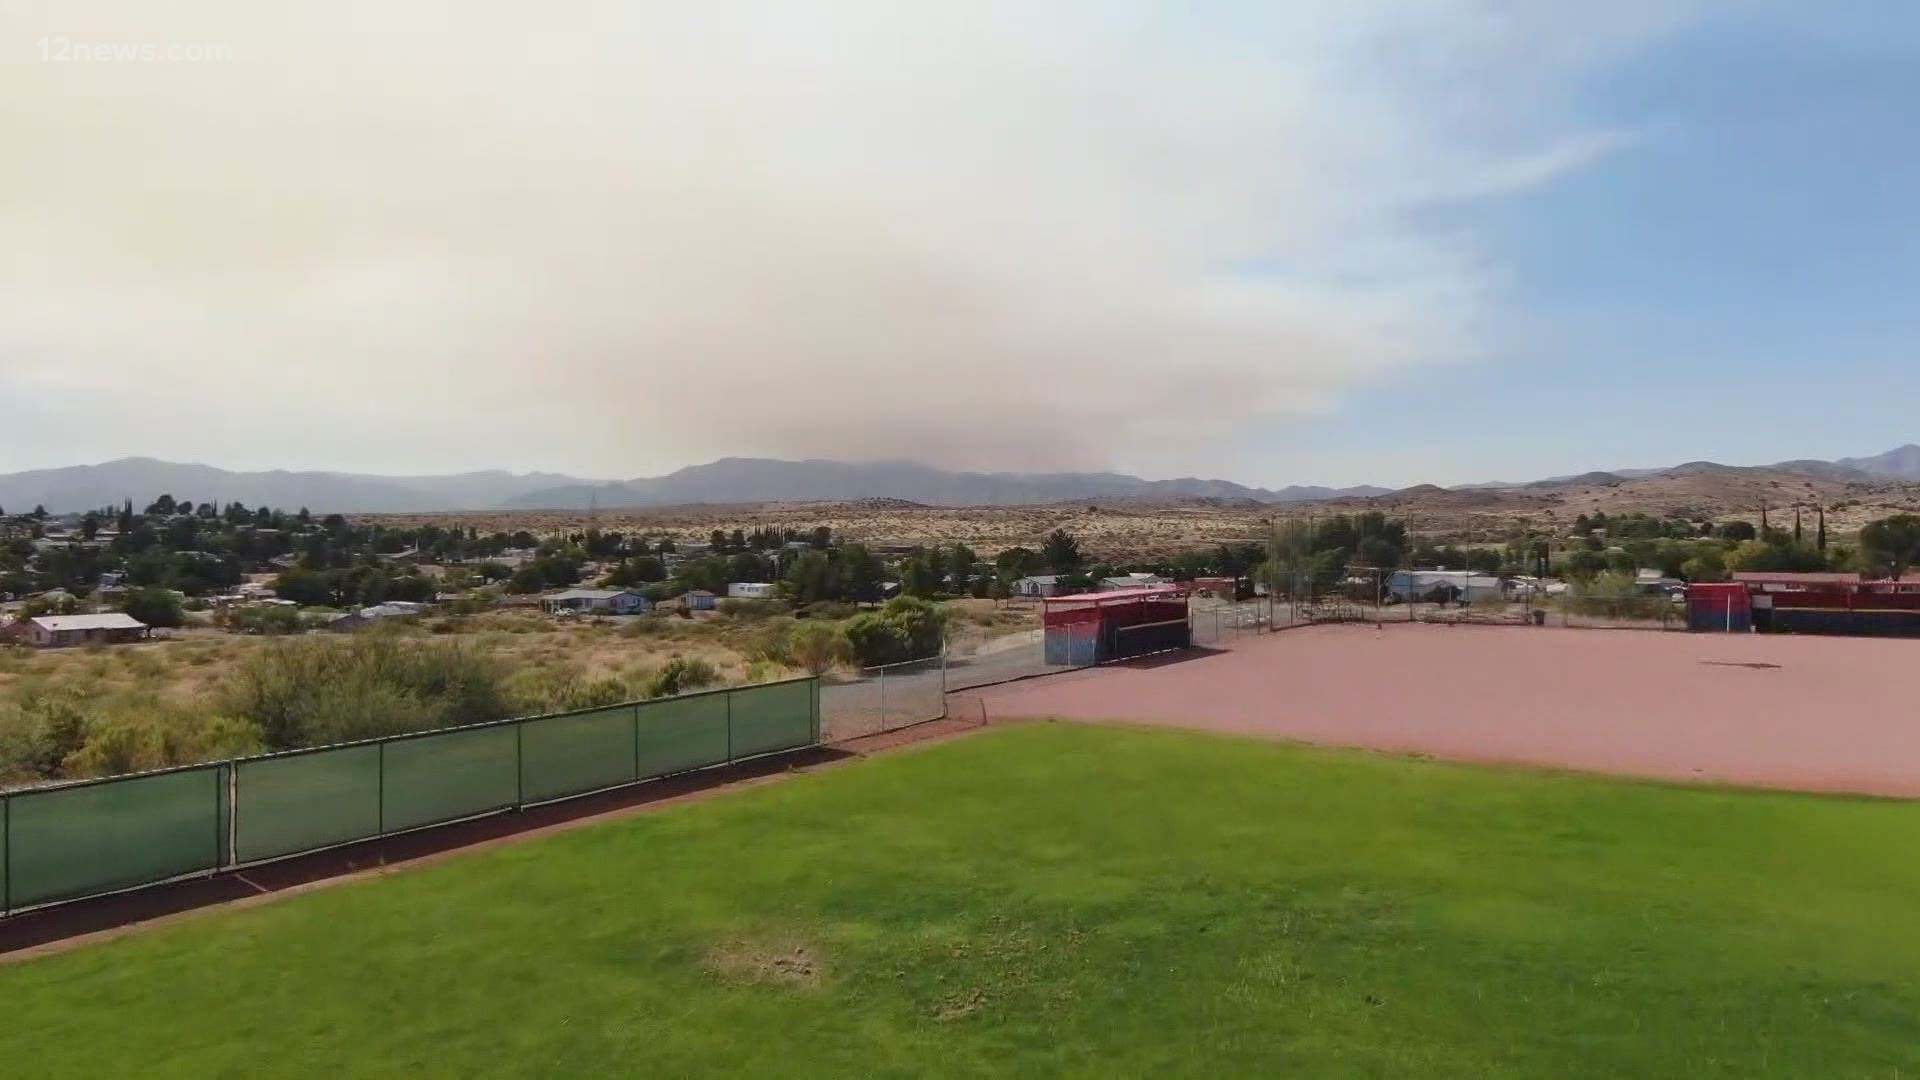 Phoenix lifts its annual fire ban in parks and preserves. Rachel McNeill has the details.